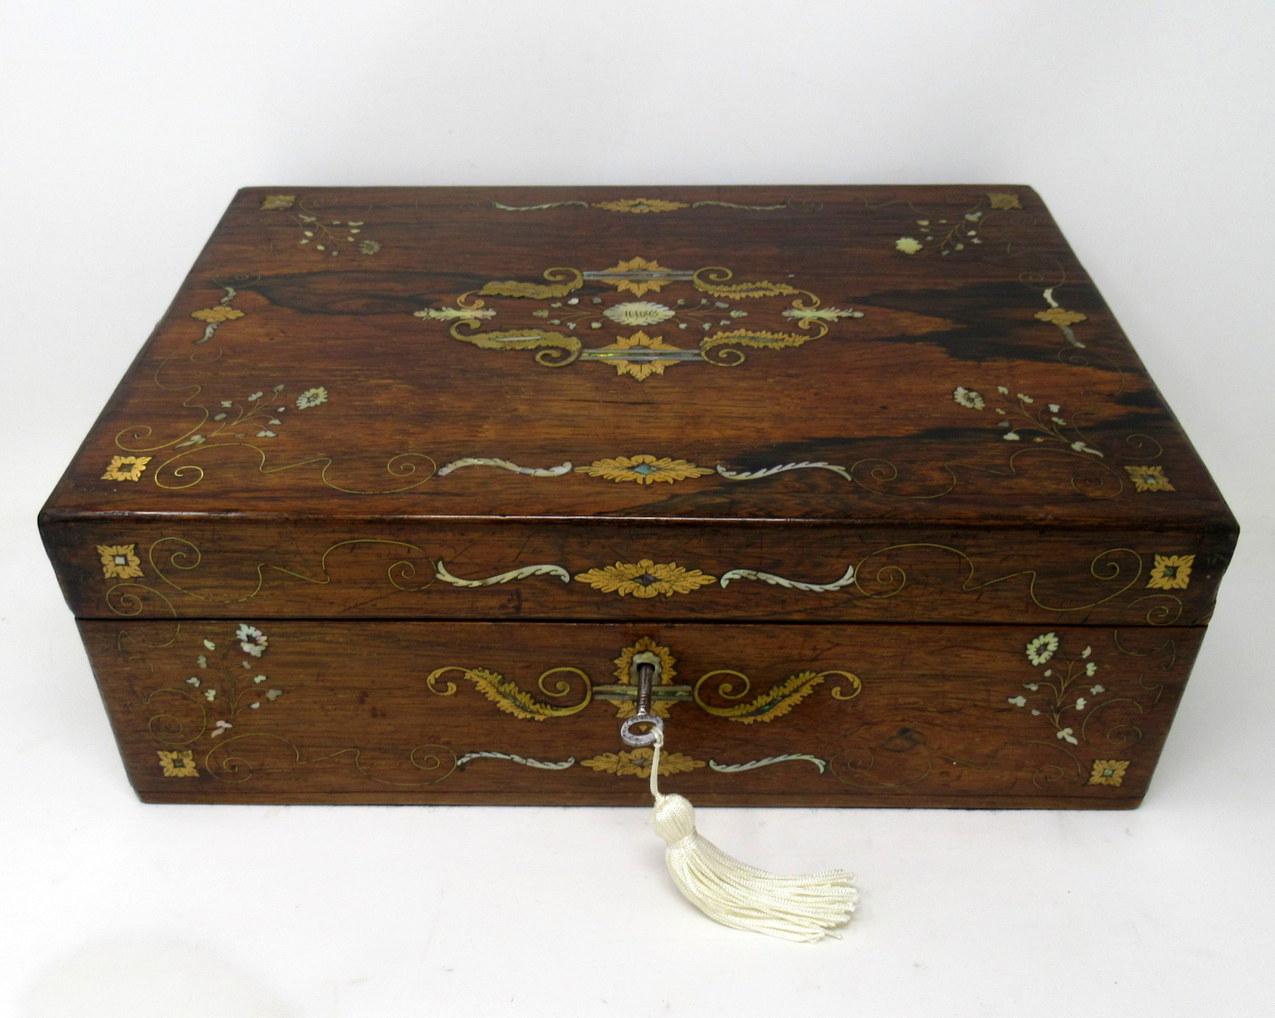 Stunning and rare example of an Irish well grained mahogany travelling writing slope of good size proportions, made in Dublin, Ireland by George Austin. Third quarter of the 19th century.

The entire outer main area with lavish decorative inlay,